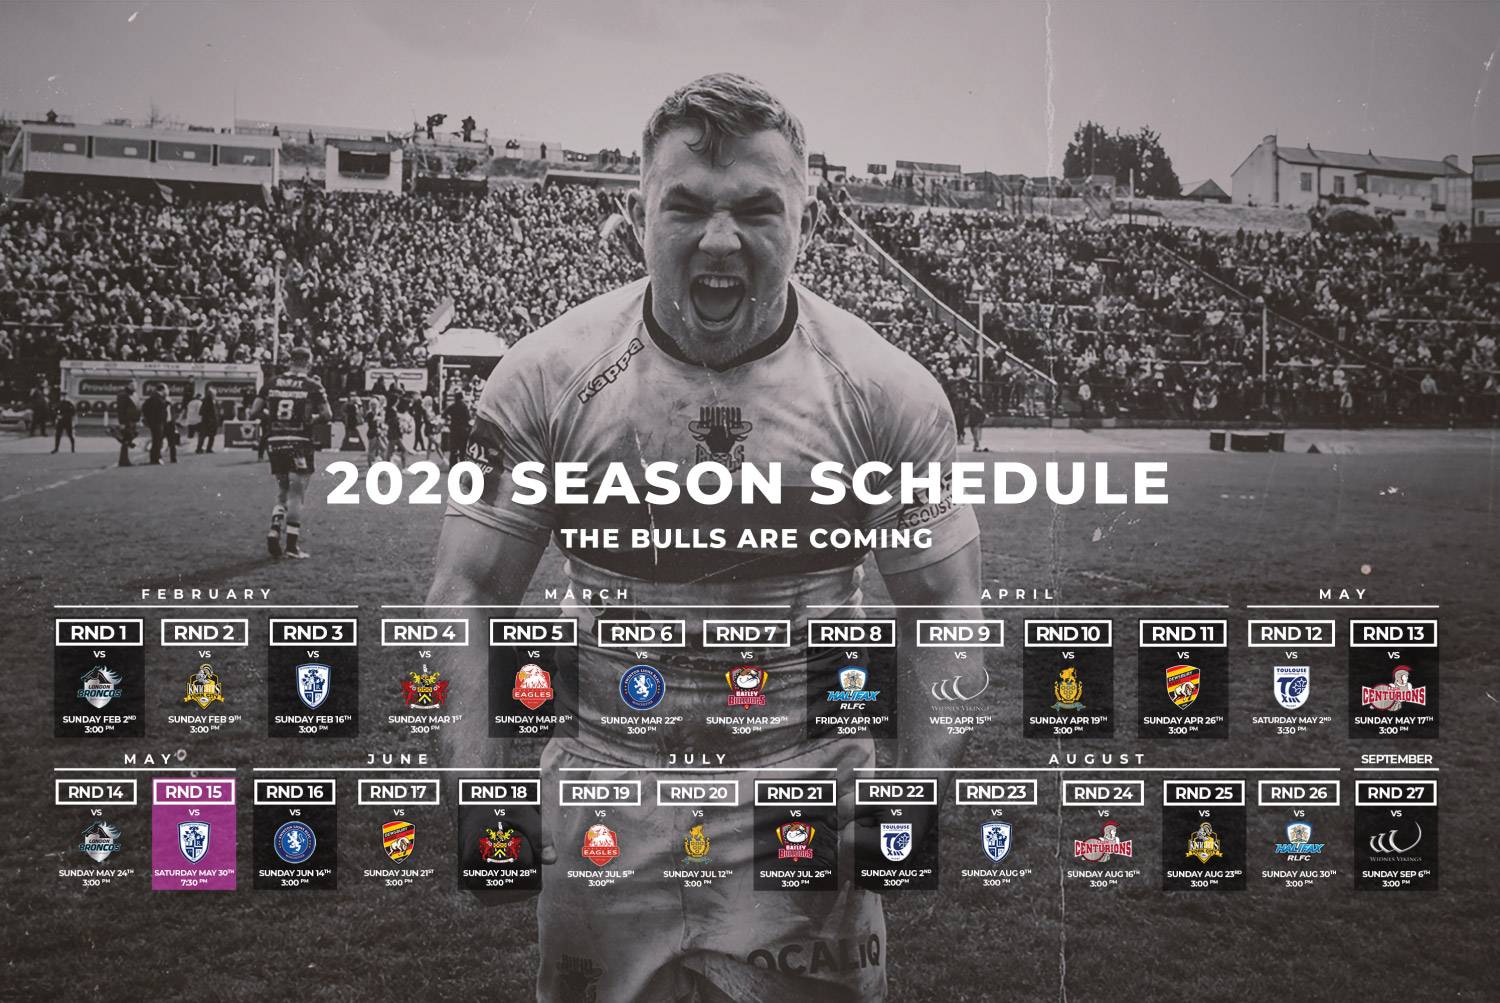 2020 BETFRED CHAMPIONSHIP FIXTURES ANNOUNCED — Swinton Lions RLFC